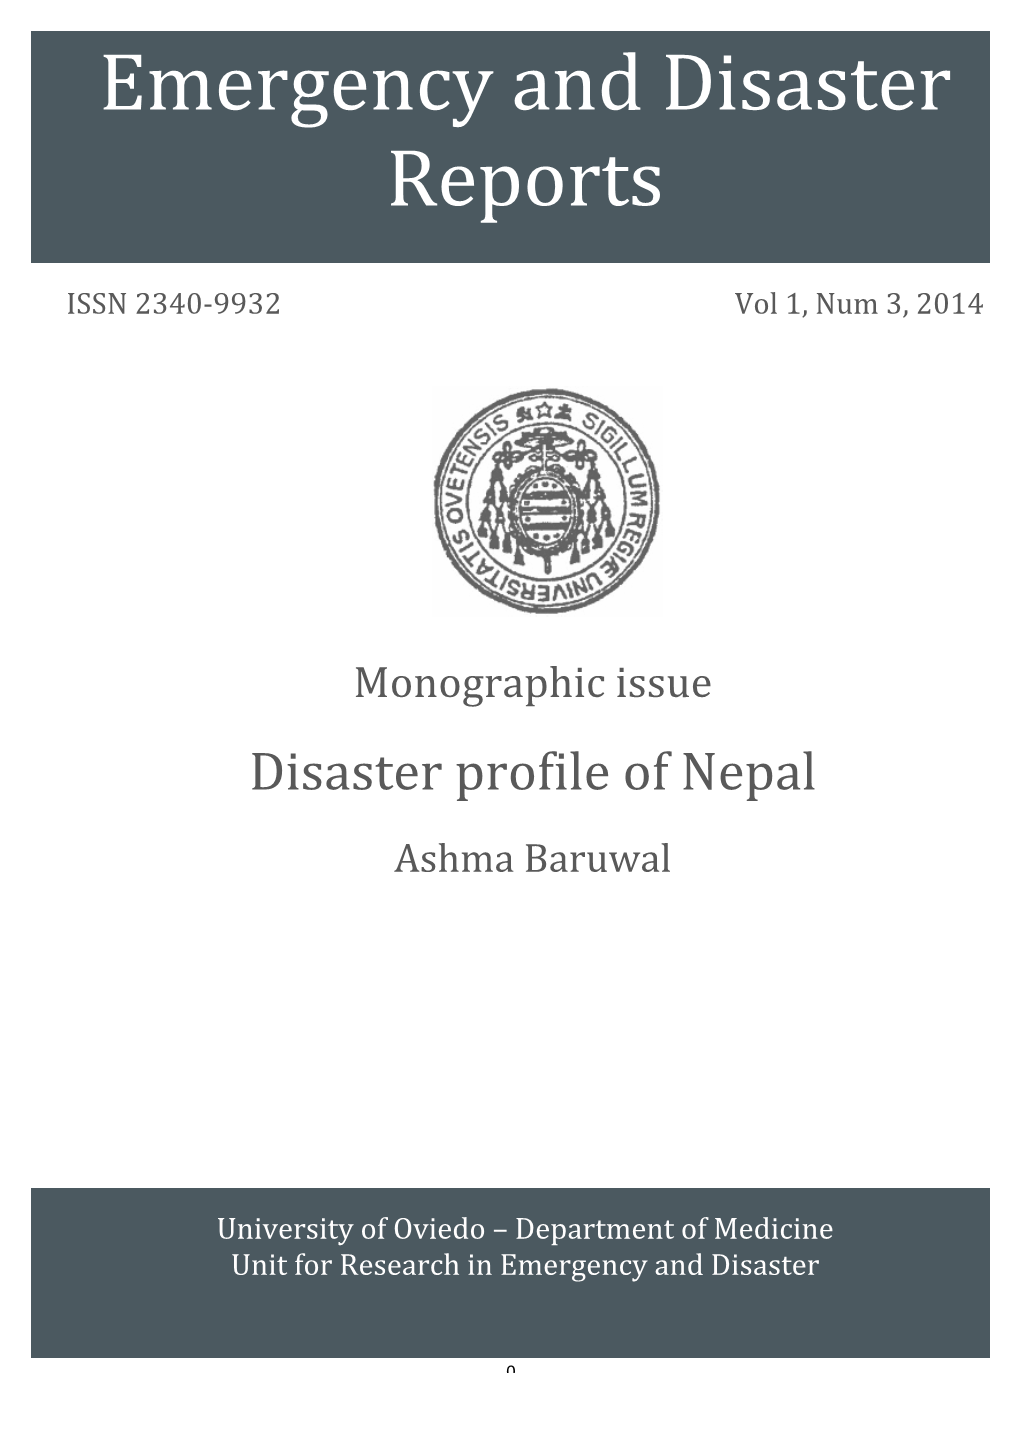 Emergency and Disaster Reports 2014; 1 (3): 3-49 Emergency and Disaster Reports